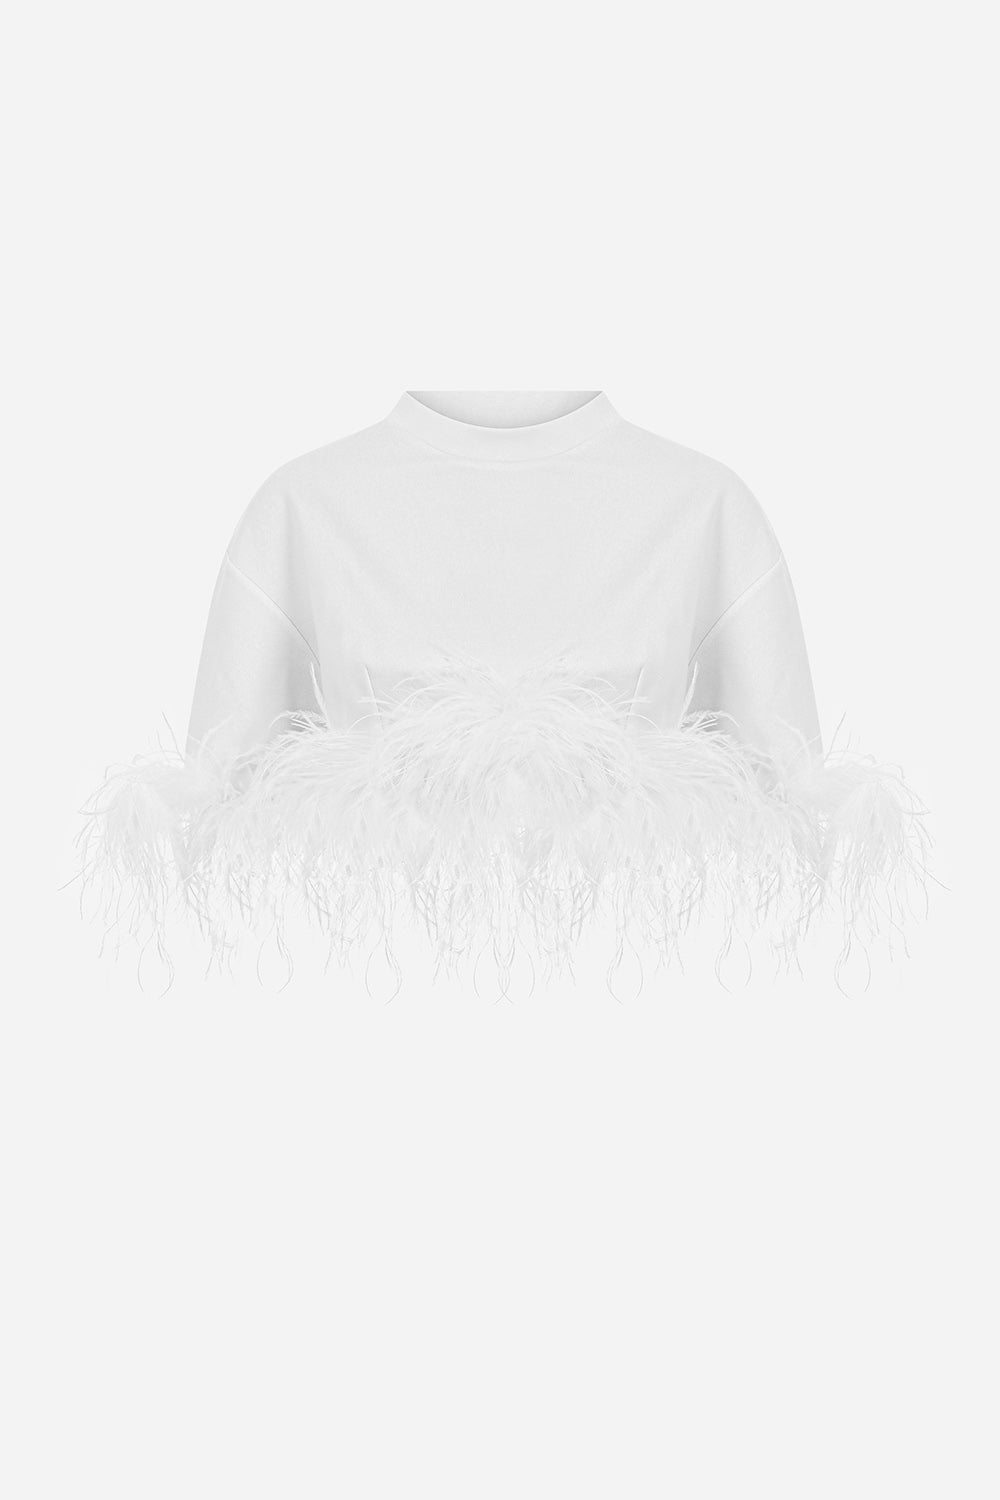 Bella - Crop Top With Feathers